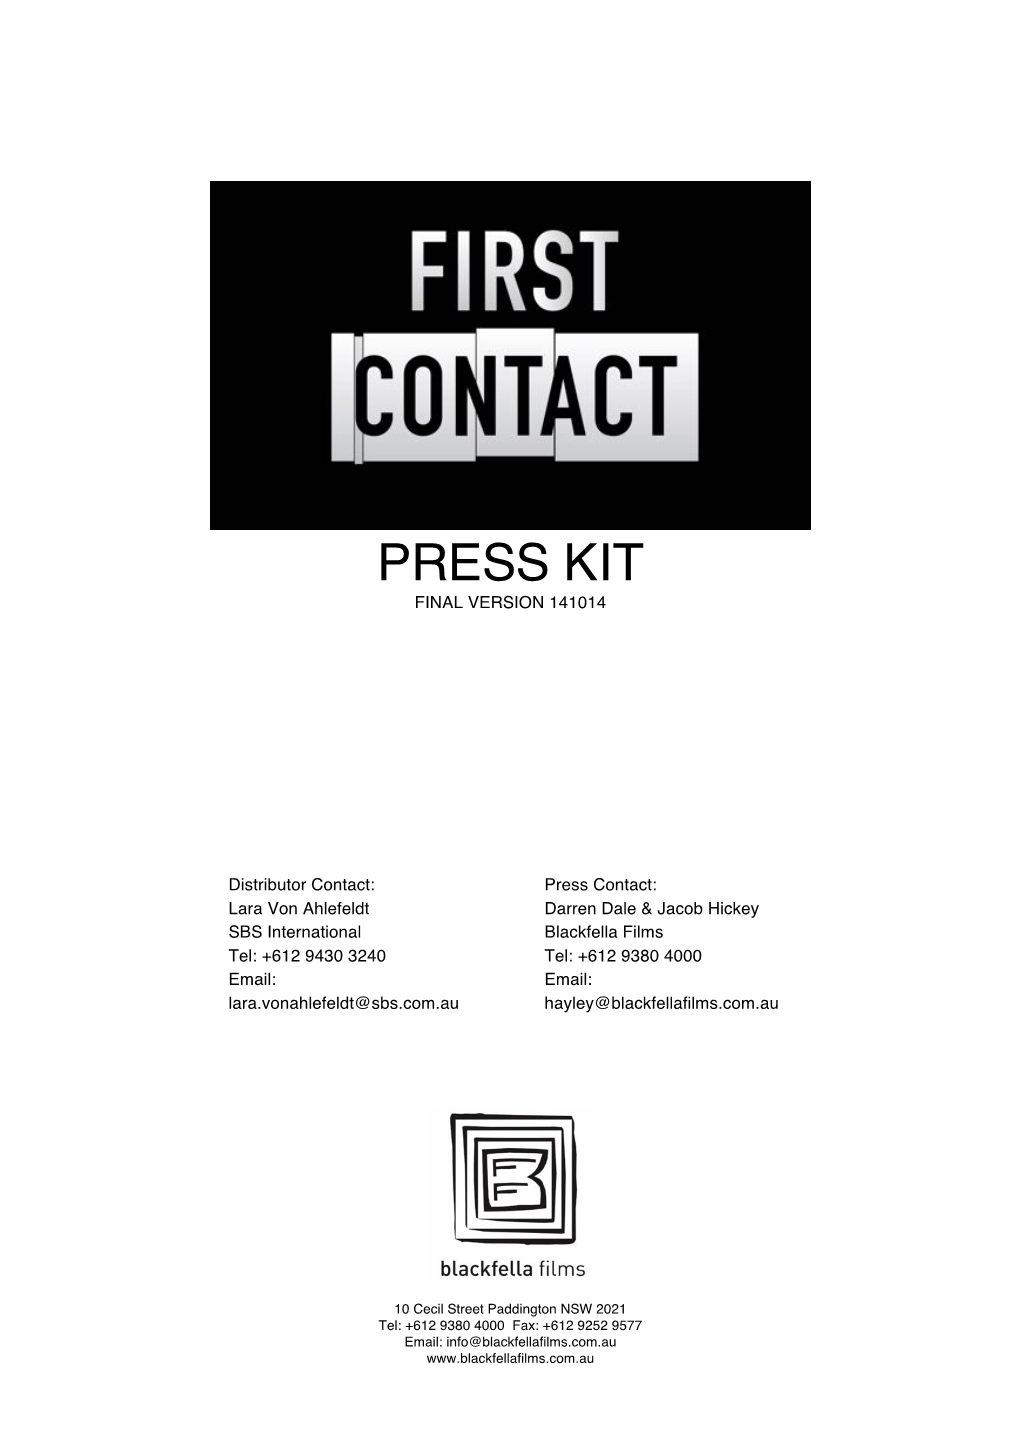 First Contact Press